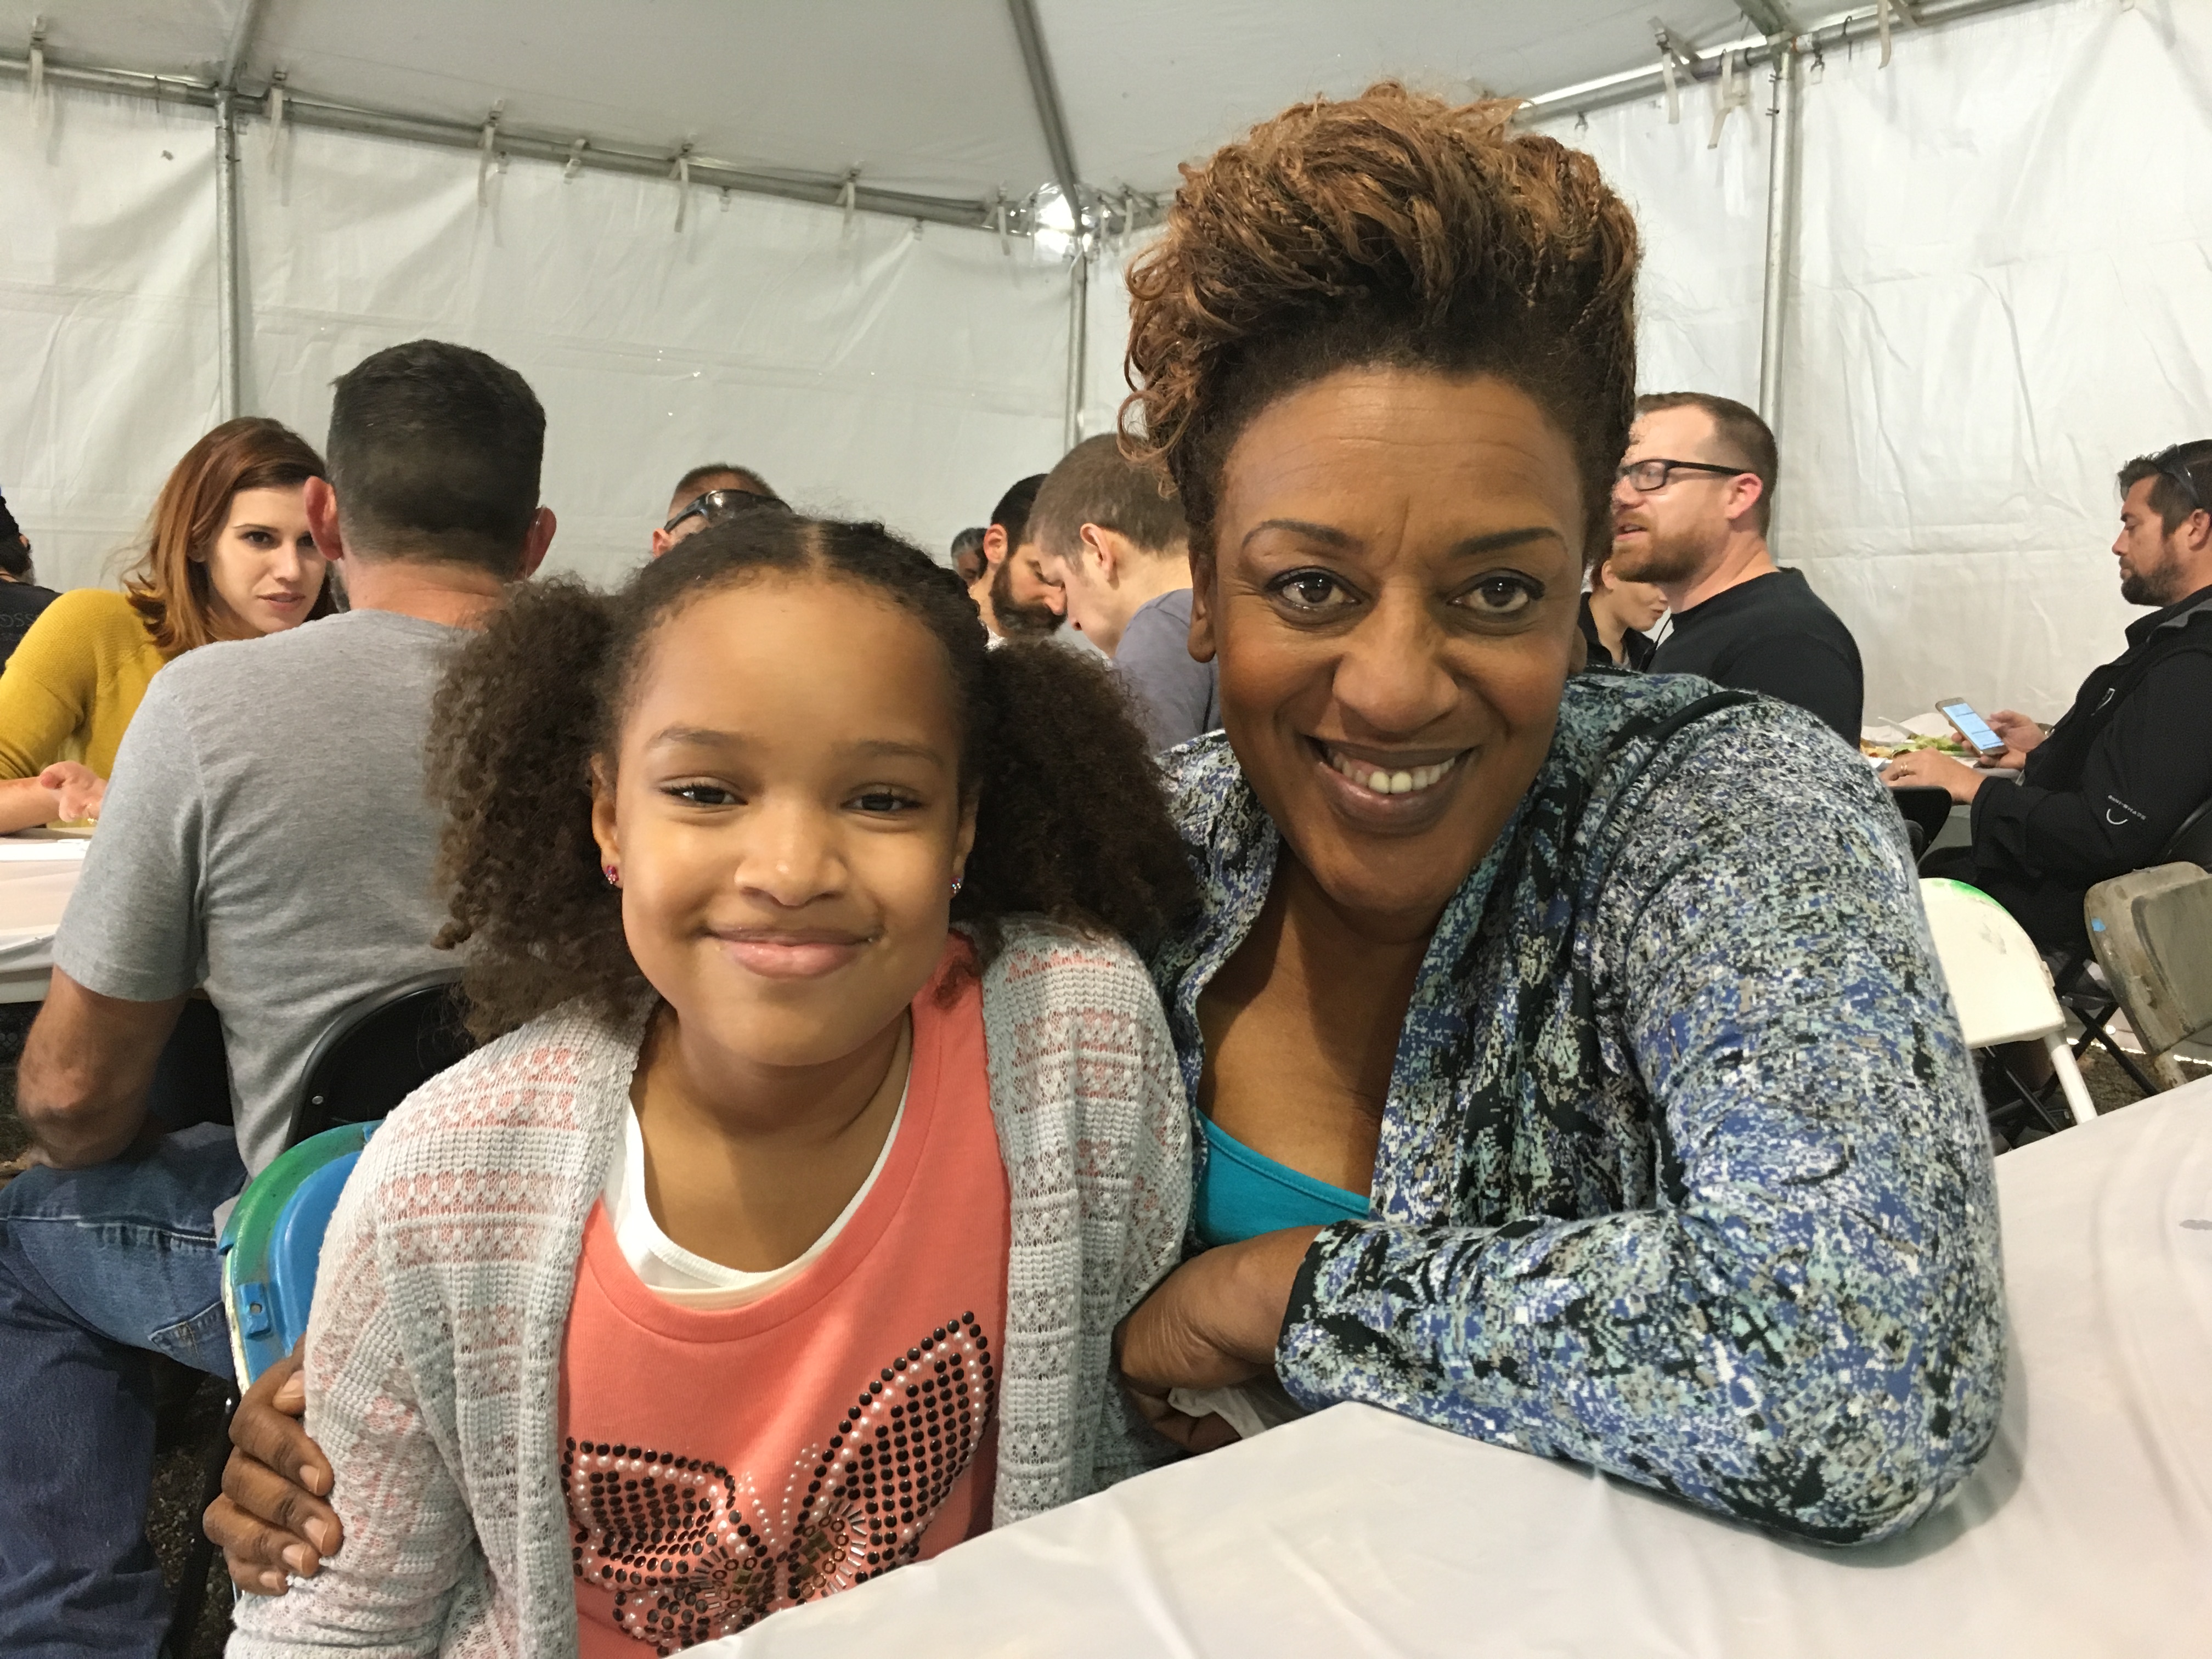 On set of NCIS with Ms. CCH Pounder in New Orleans